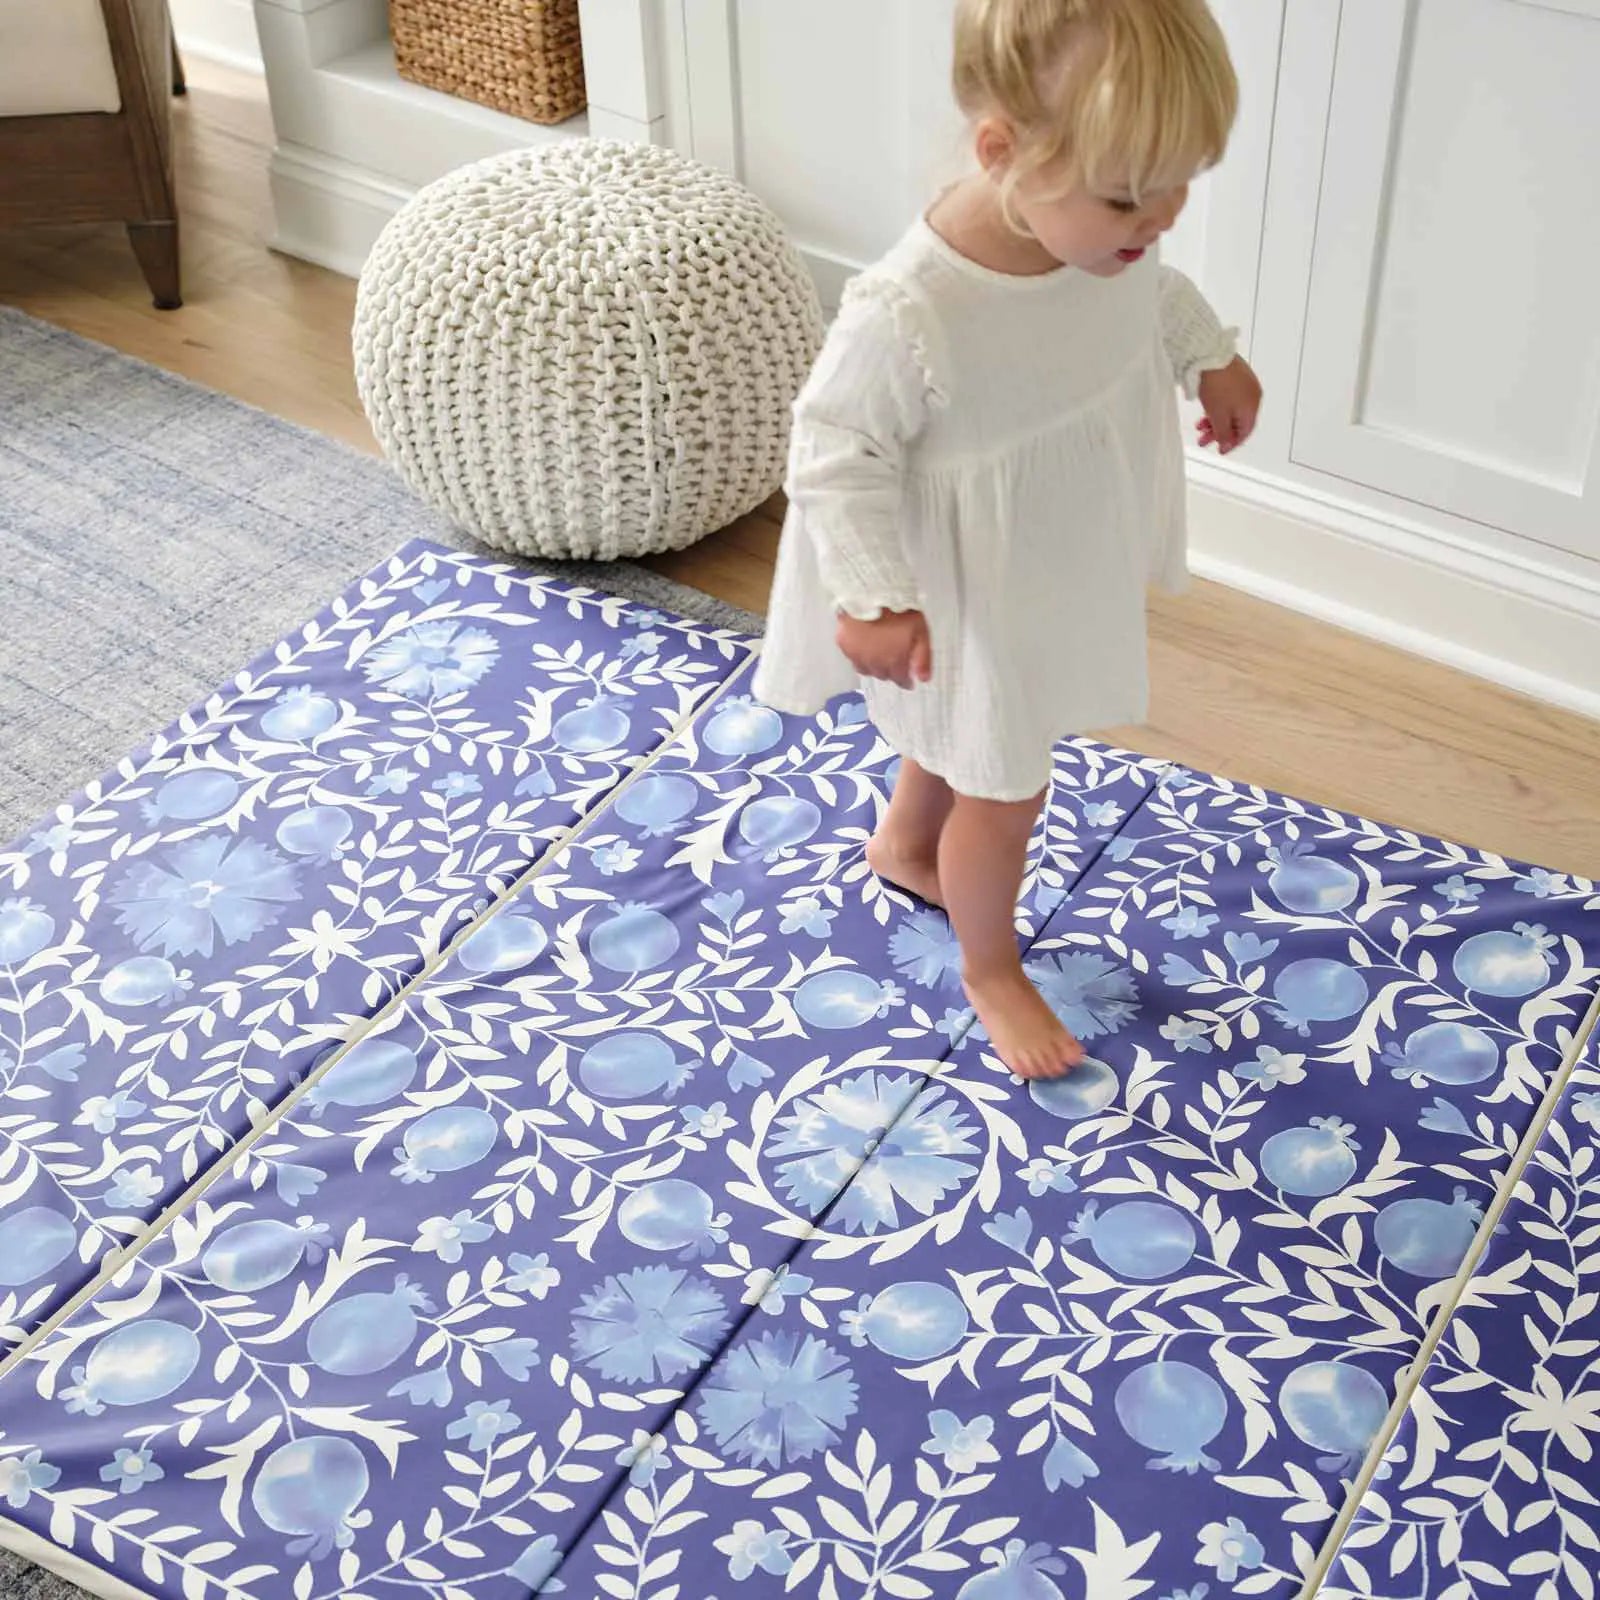 Deep sea blue and white floral tumbling mat shown in living room with toddler girl walking across the mat